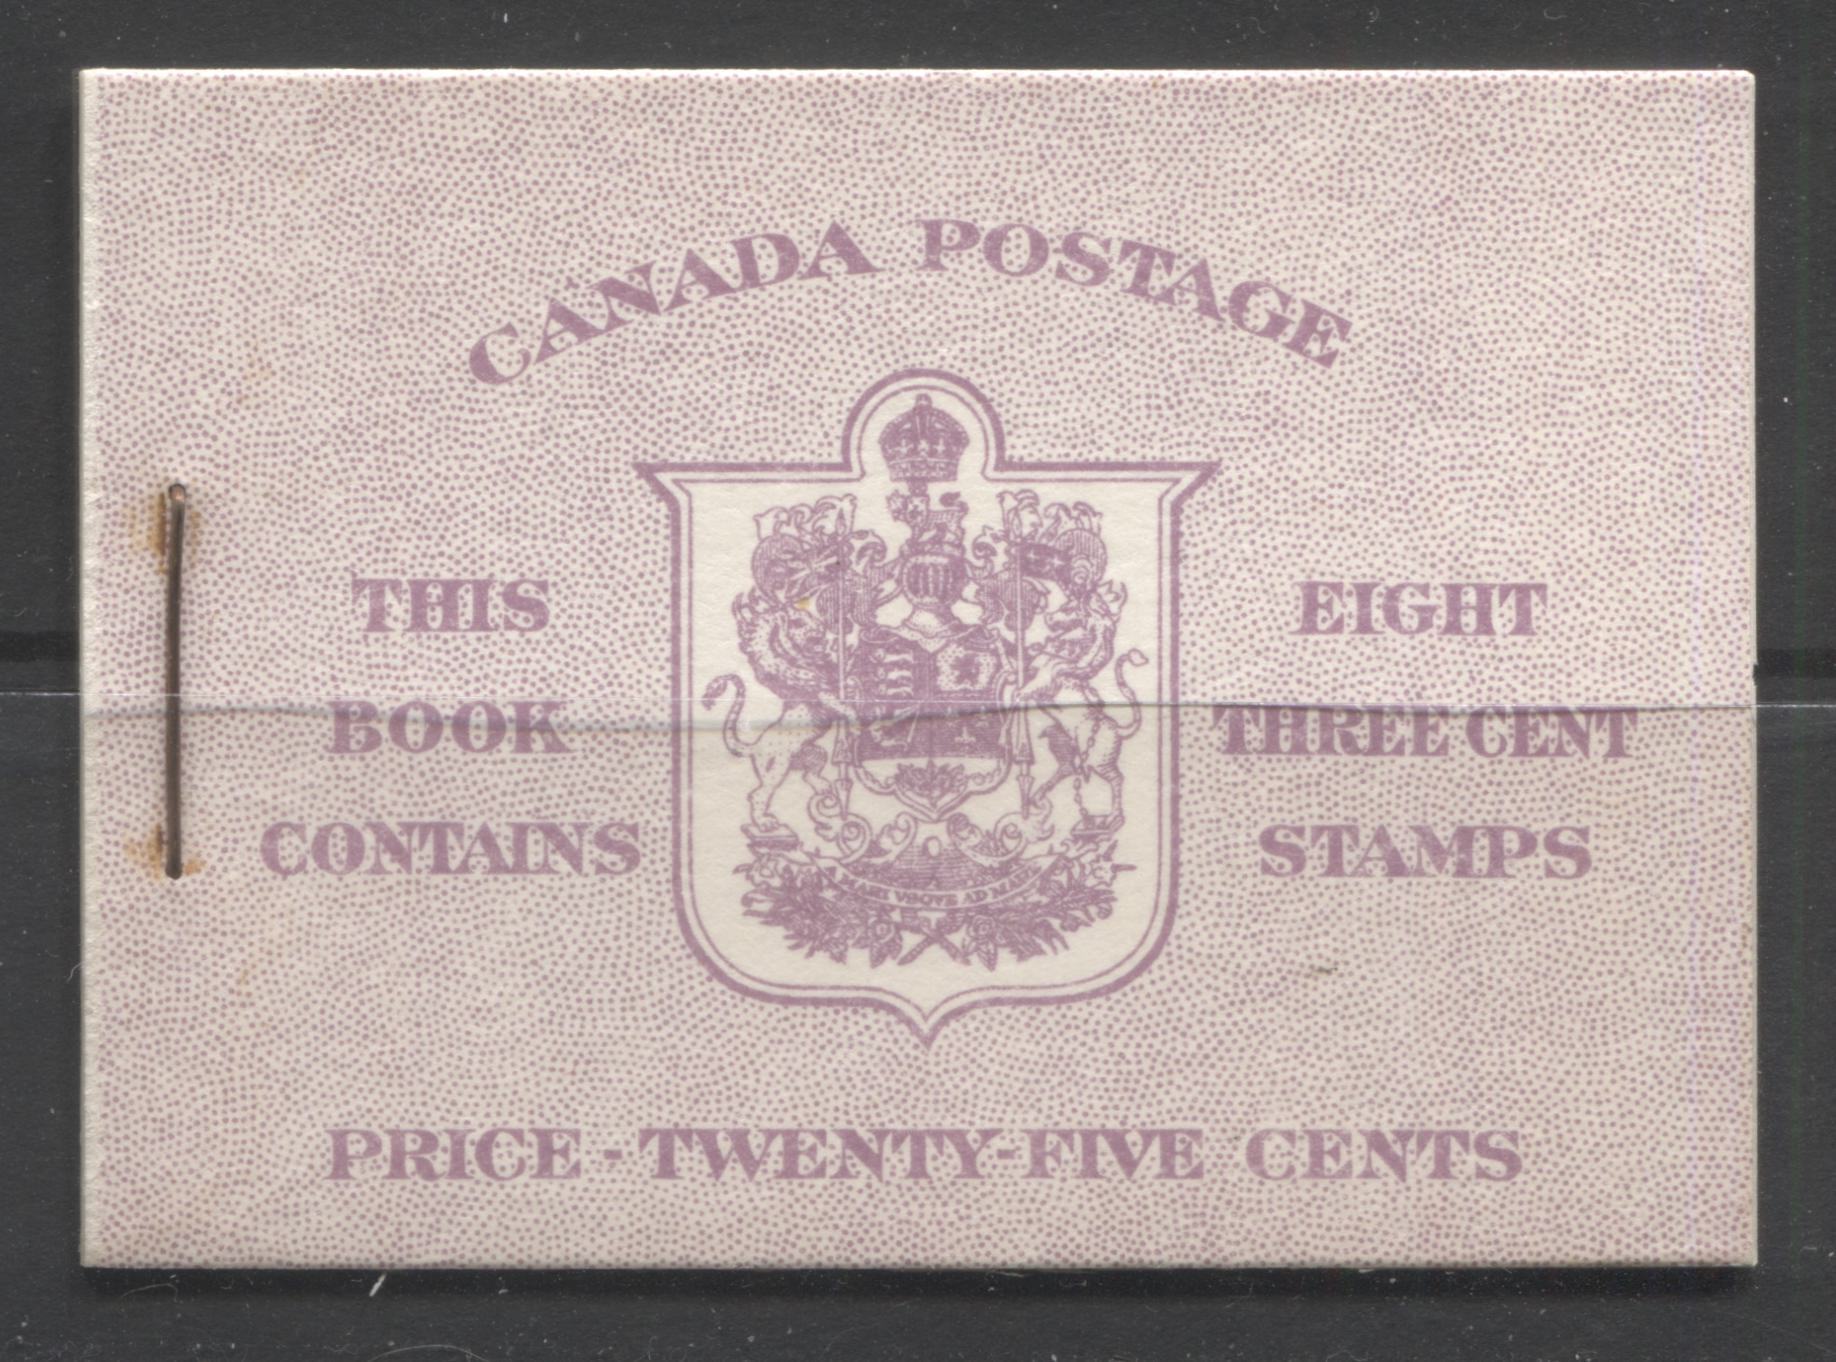 Canada #BK40a 1949-1953 Postes-Postage Issue Complete 25c English, Booklet Containing 2 Panes of the 3c Rose-Purple King George VI, Harris Front Cover Type IIf, Back Cover Caiii, 7c & 5c Rate Page, Broken "M" in Small Brixton Chrome 